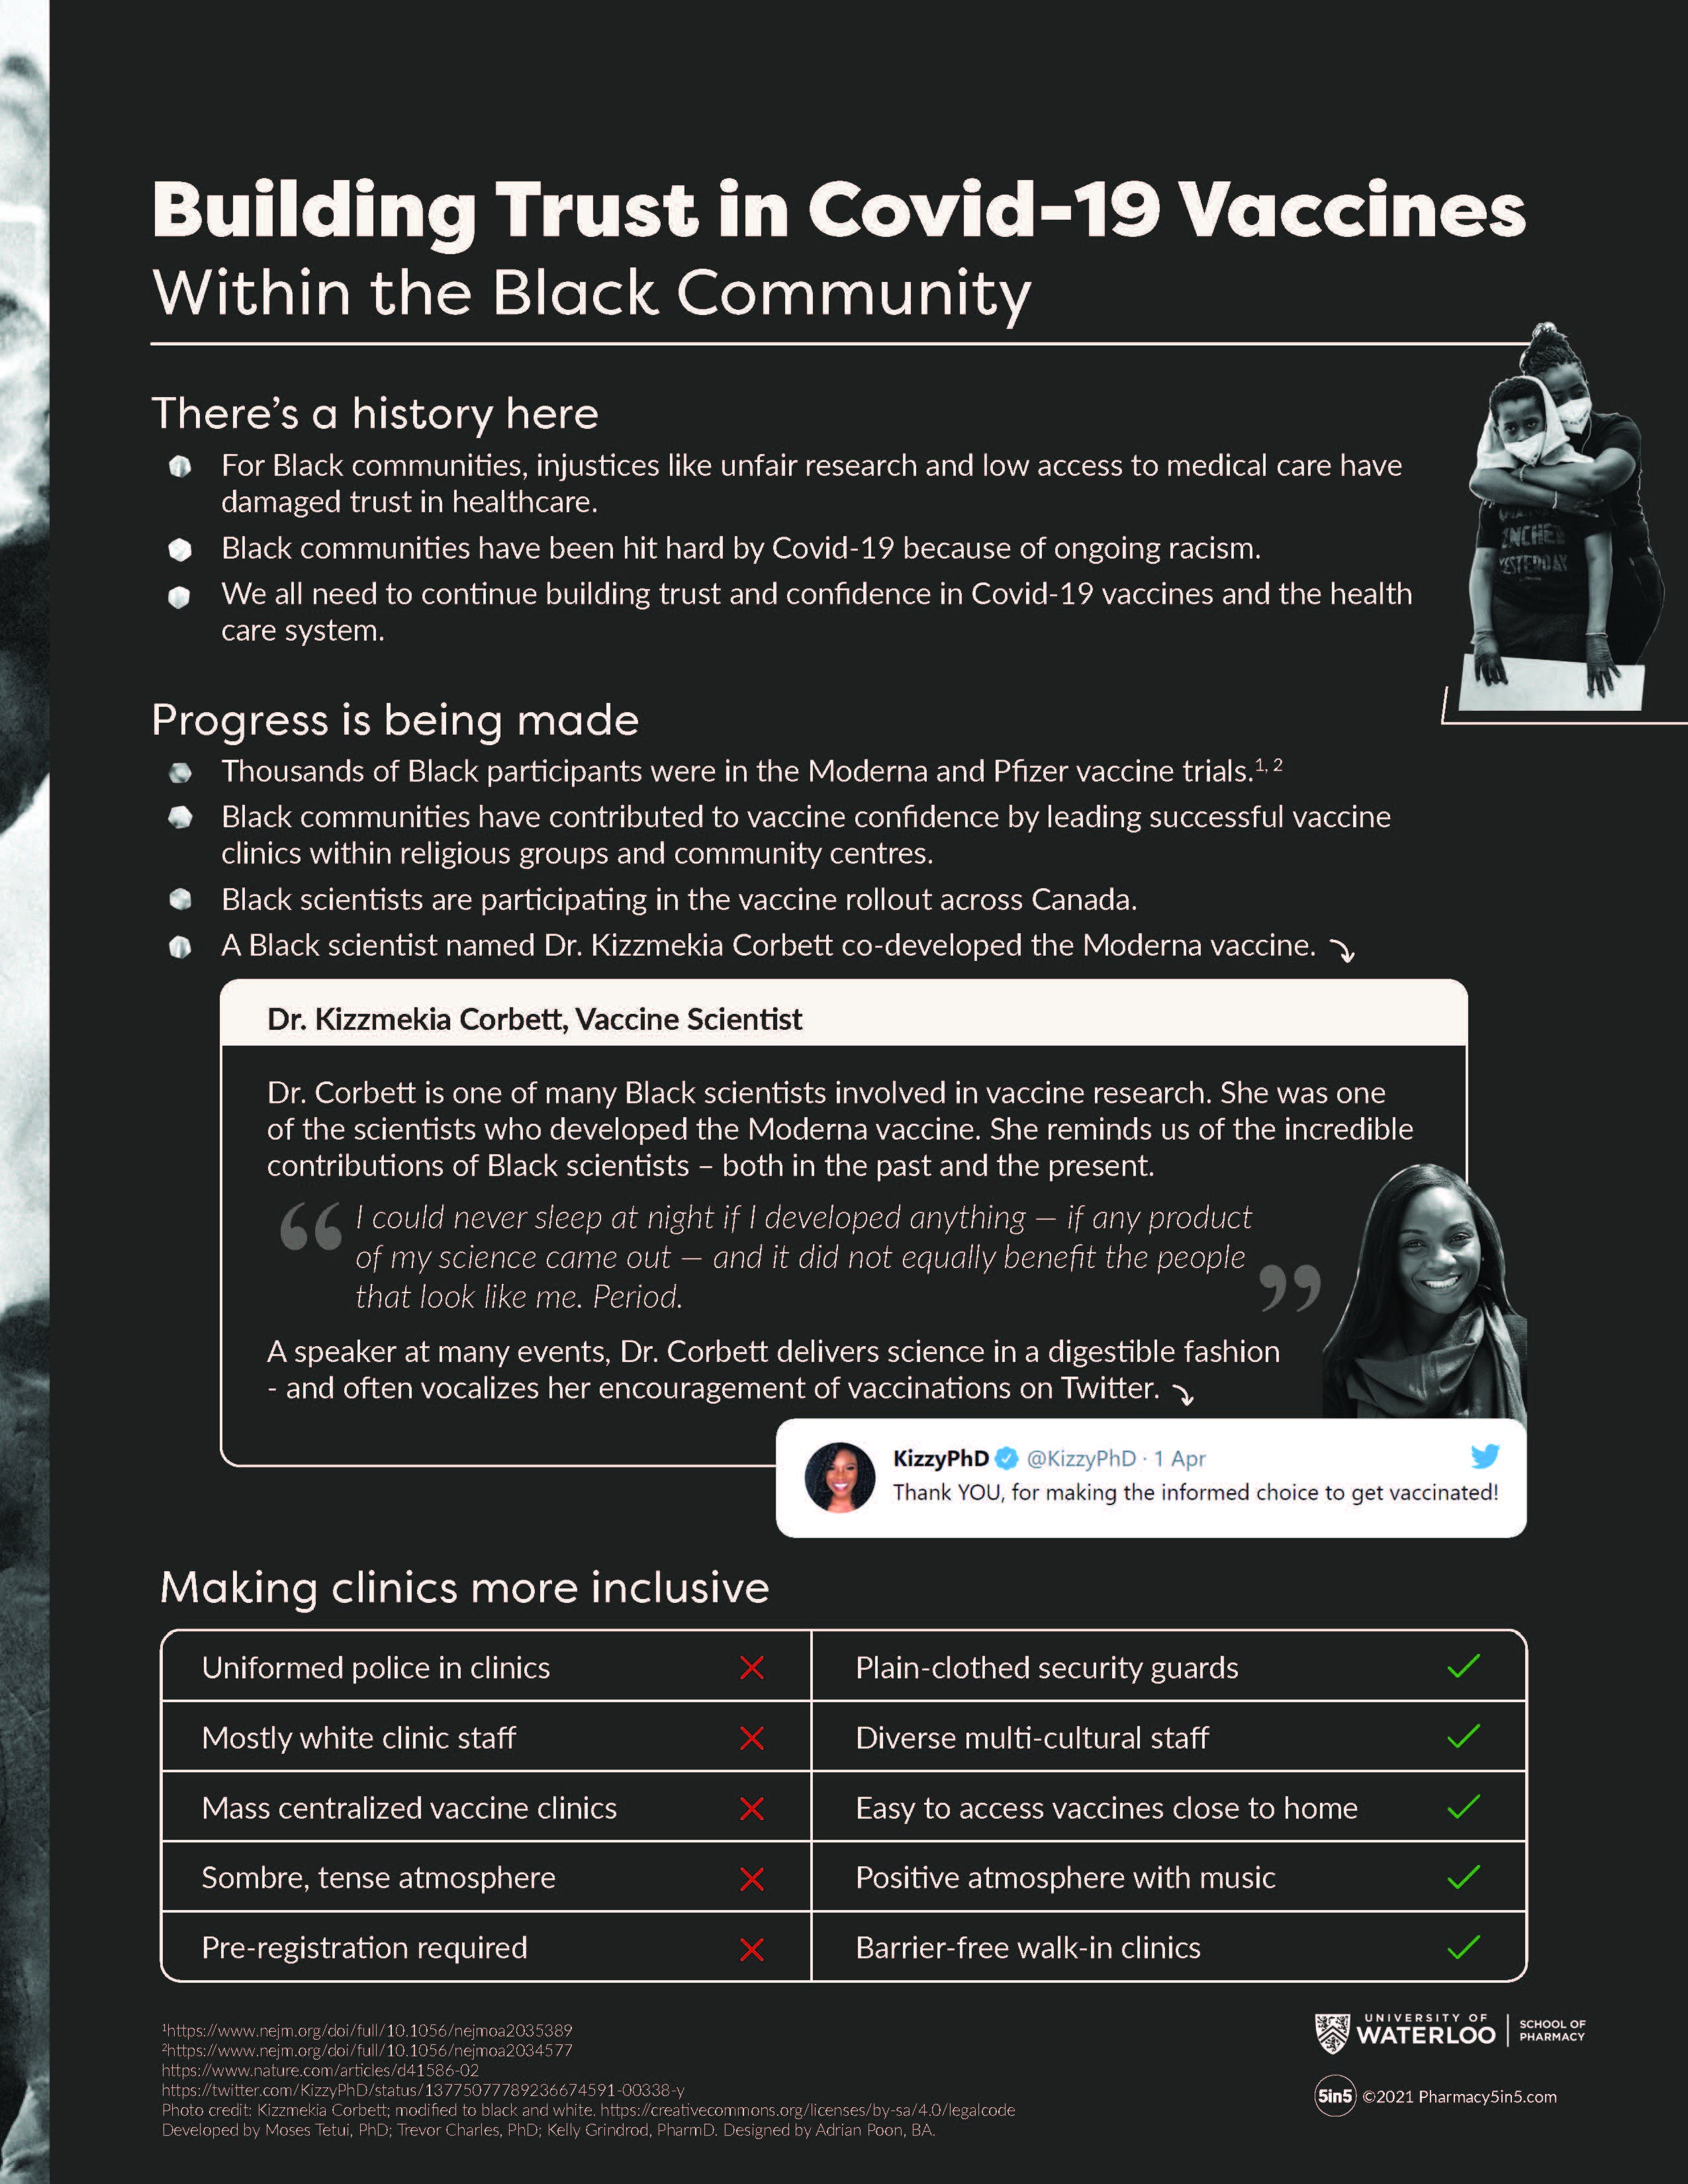 Infographic with information about building trust in COVID-19 vaccines in the black community